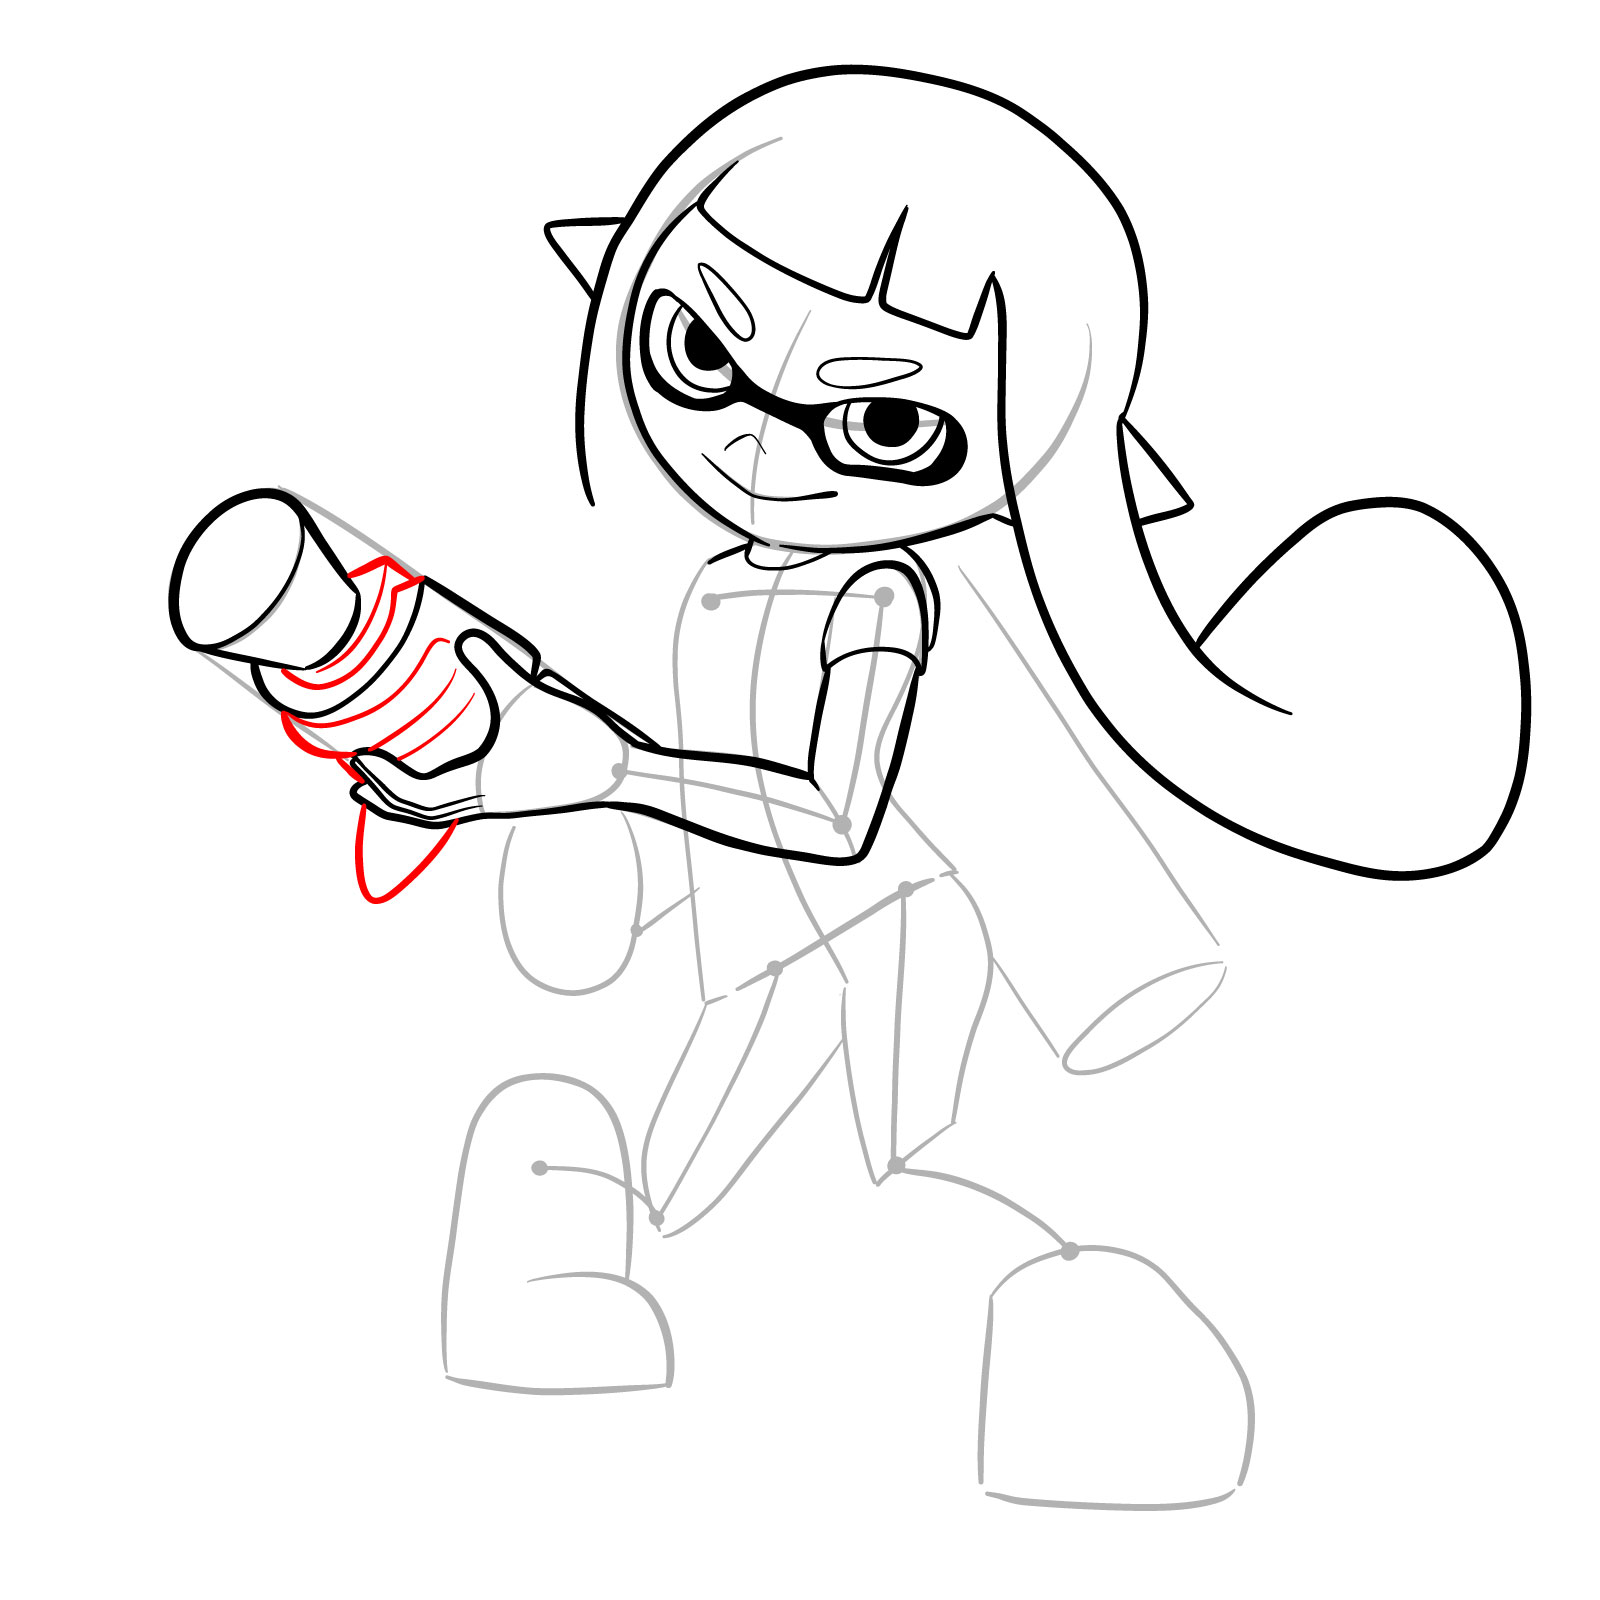 How to draw an Inkling Girl - step 17